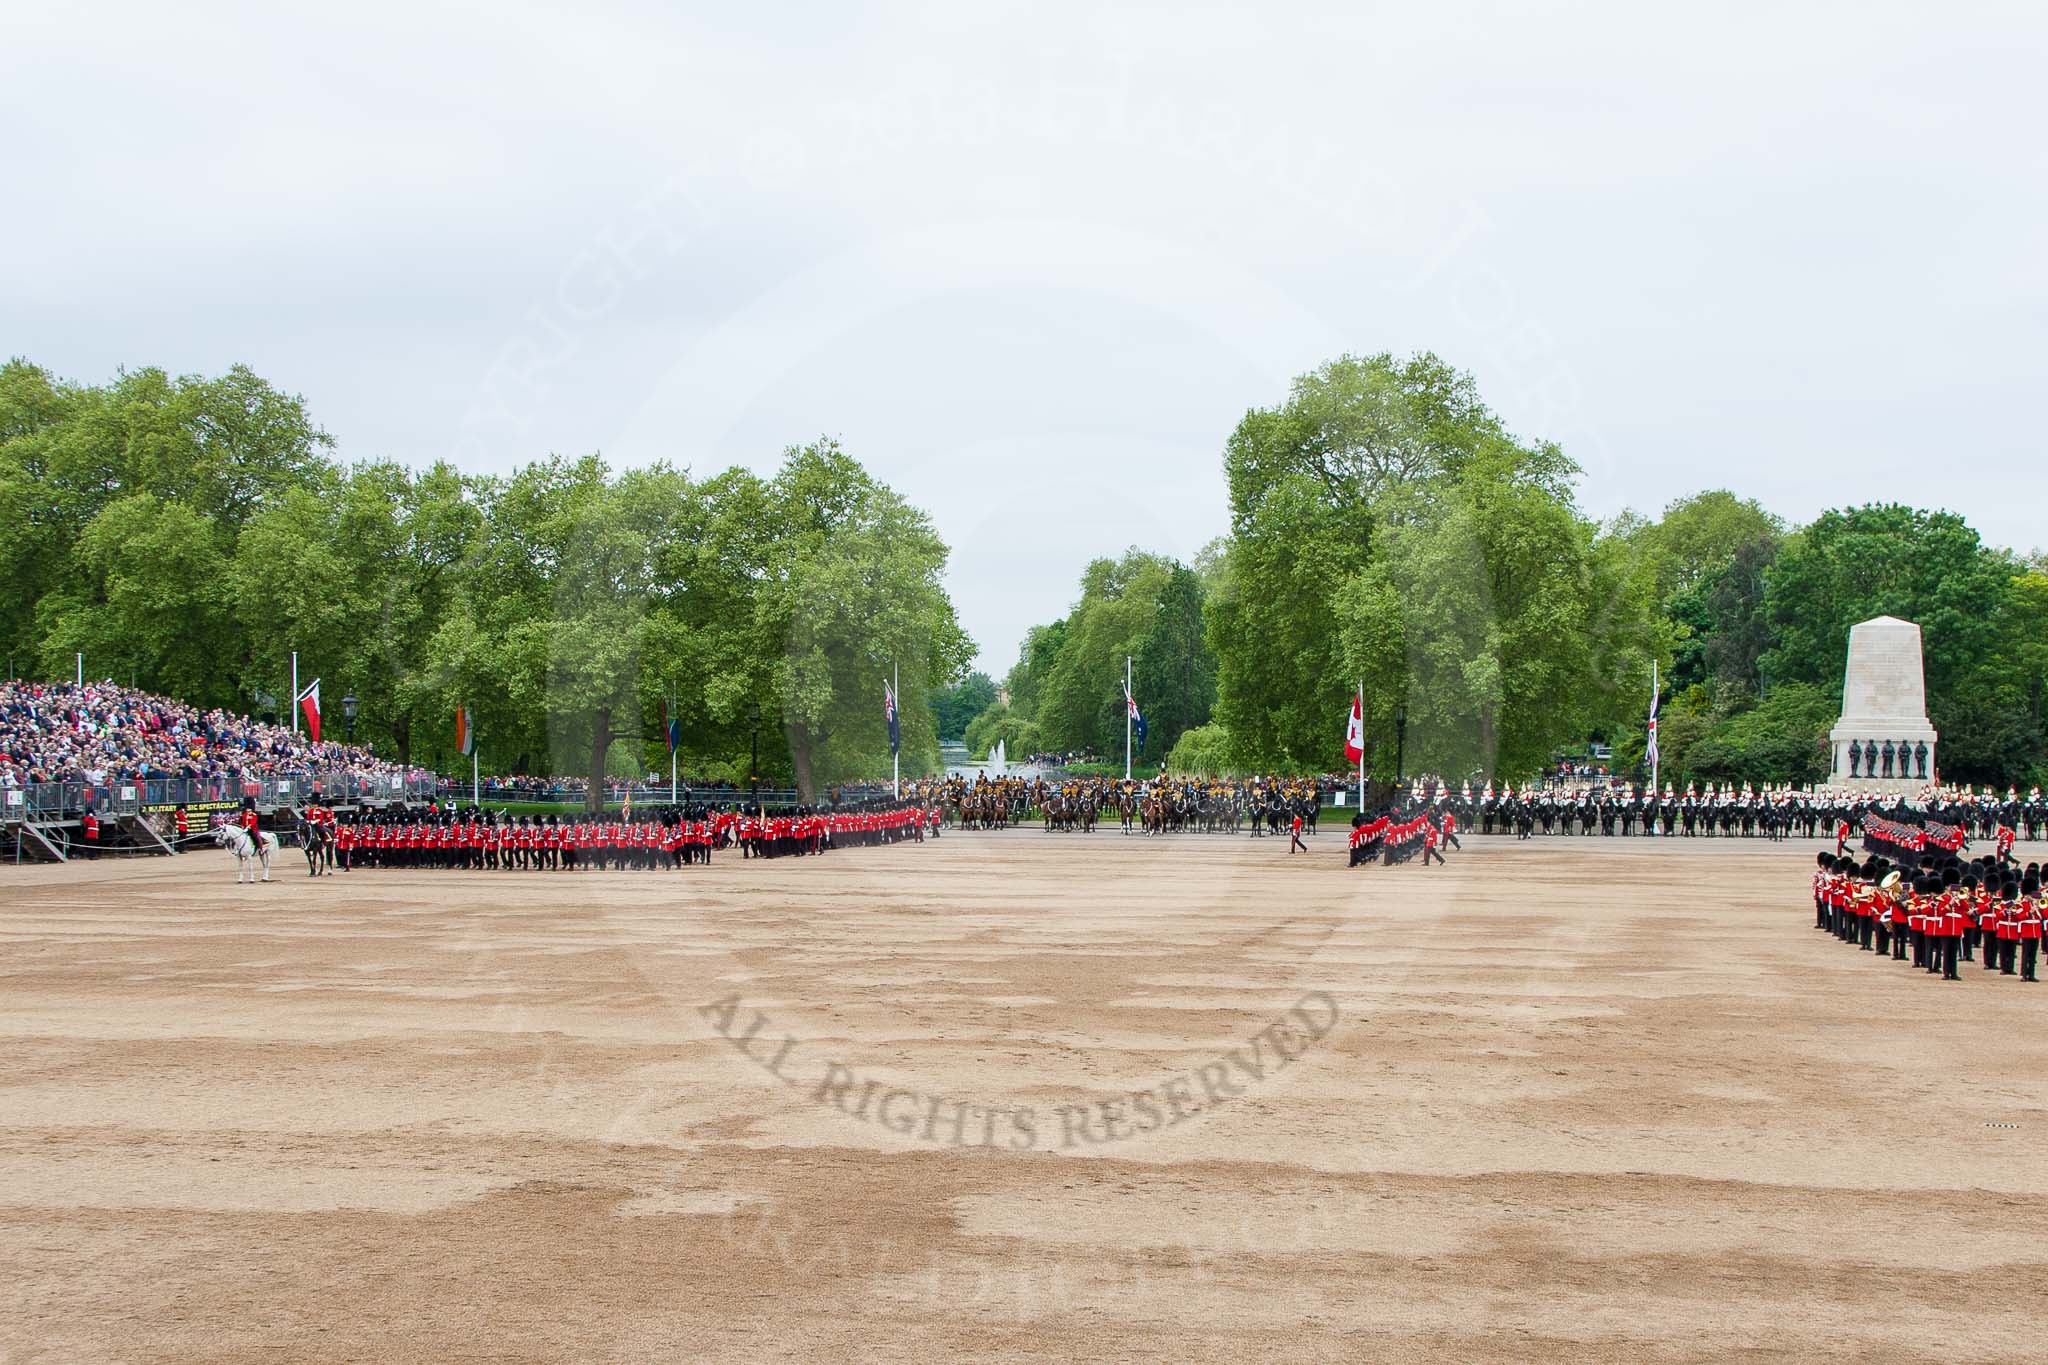 Major General's Review 2013: The March Past in Quick Time - the guards perform another ninety-degree-turn..
Horse Guards Parade, Westminster,
London SW1,

United Kingdom,
on 01 June 2013 at 11:41, image #531